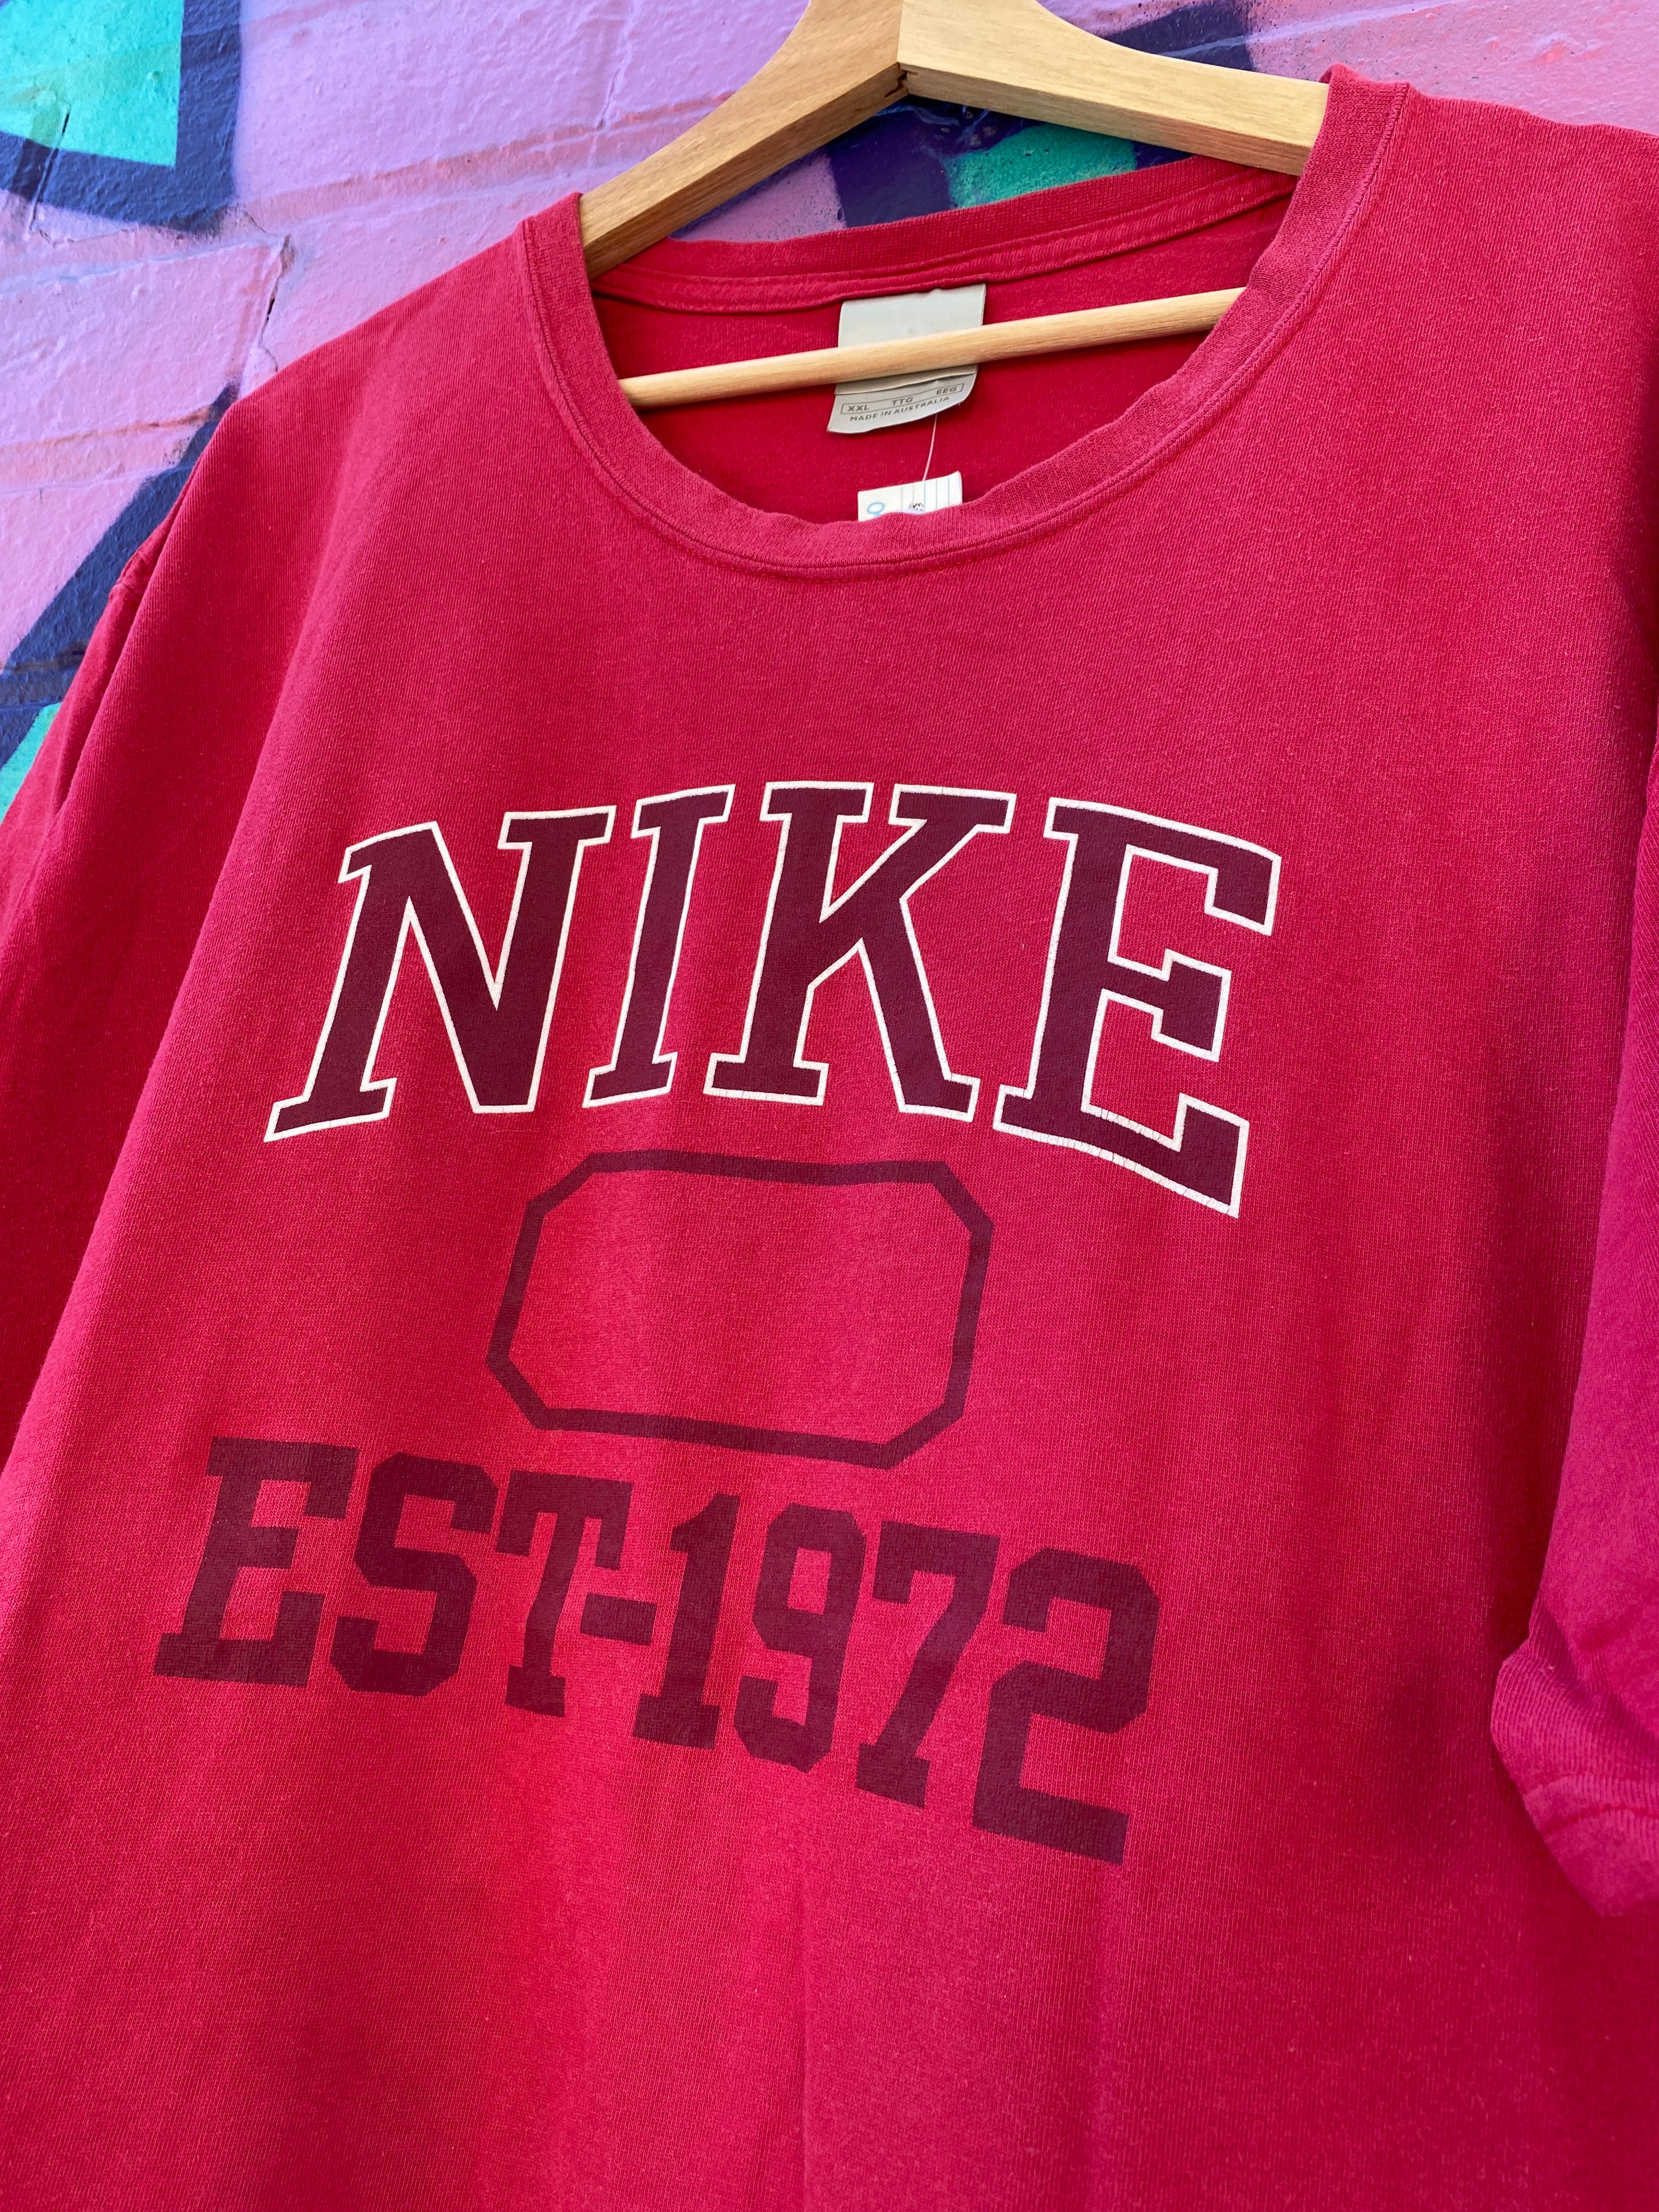 2XL - Nike EST 1972 Faded Red Tee